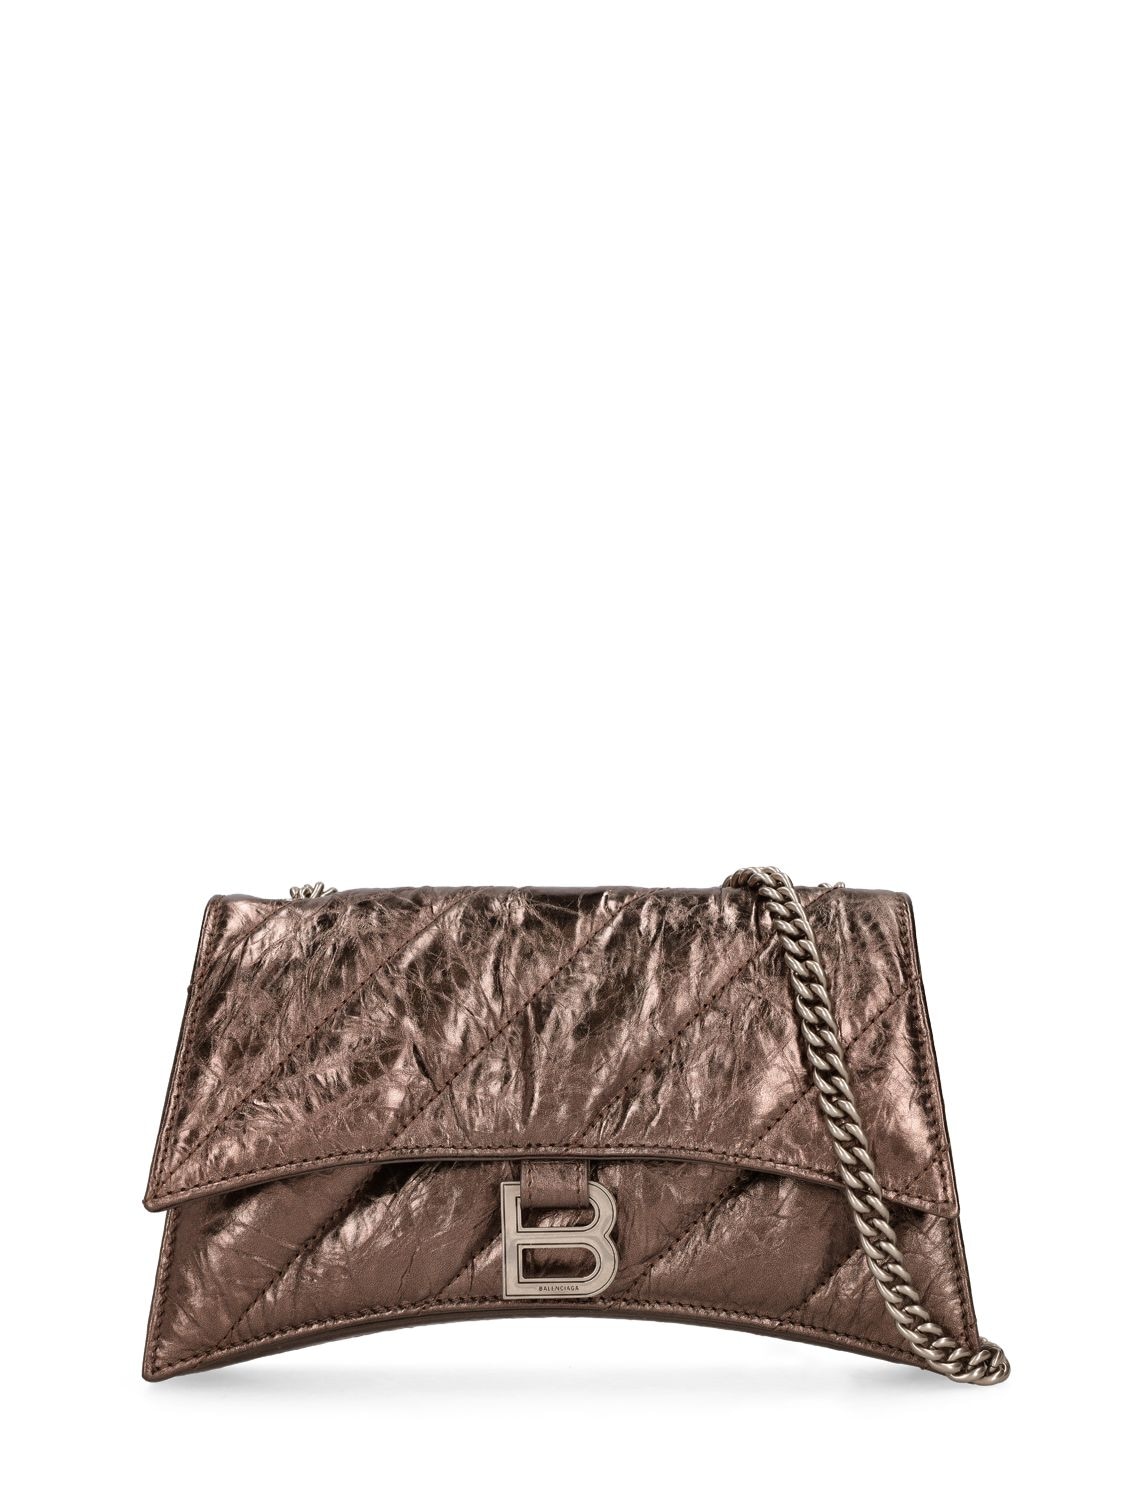 Balenciaga S Crush Quilted Leather Shoulder Bag In Dark Bronze